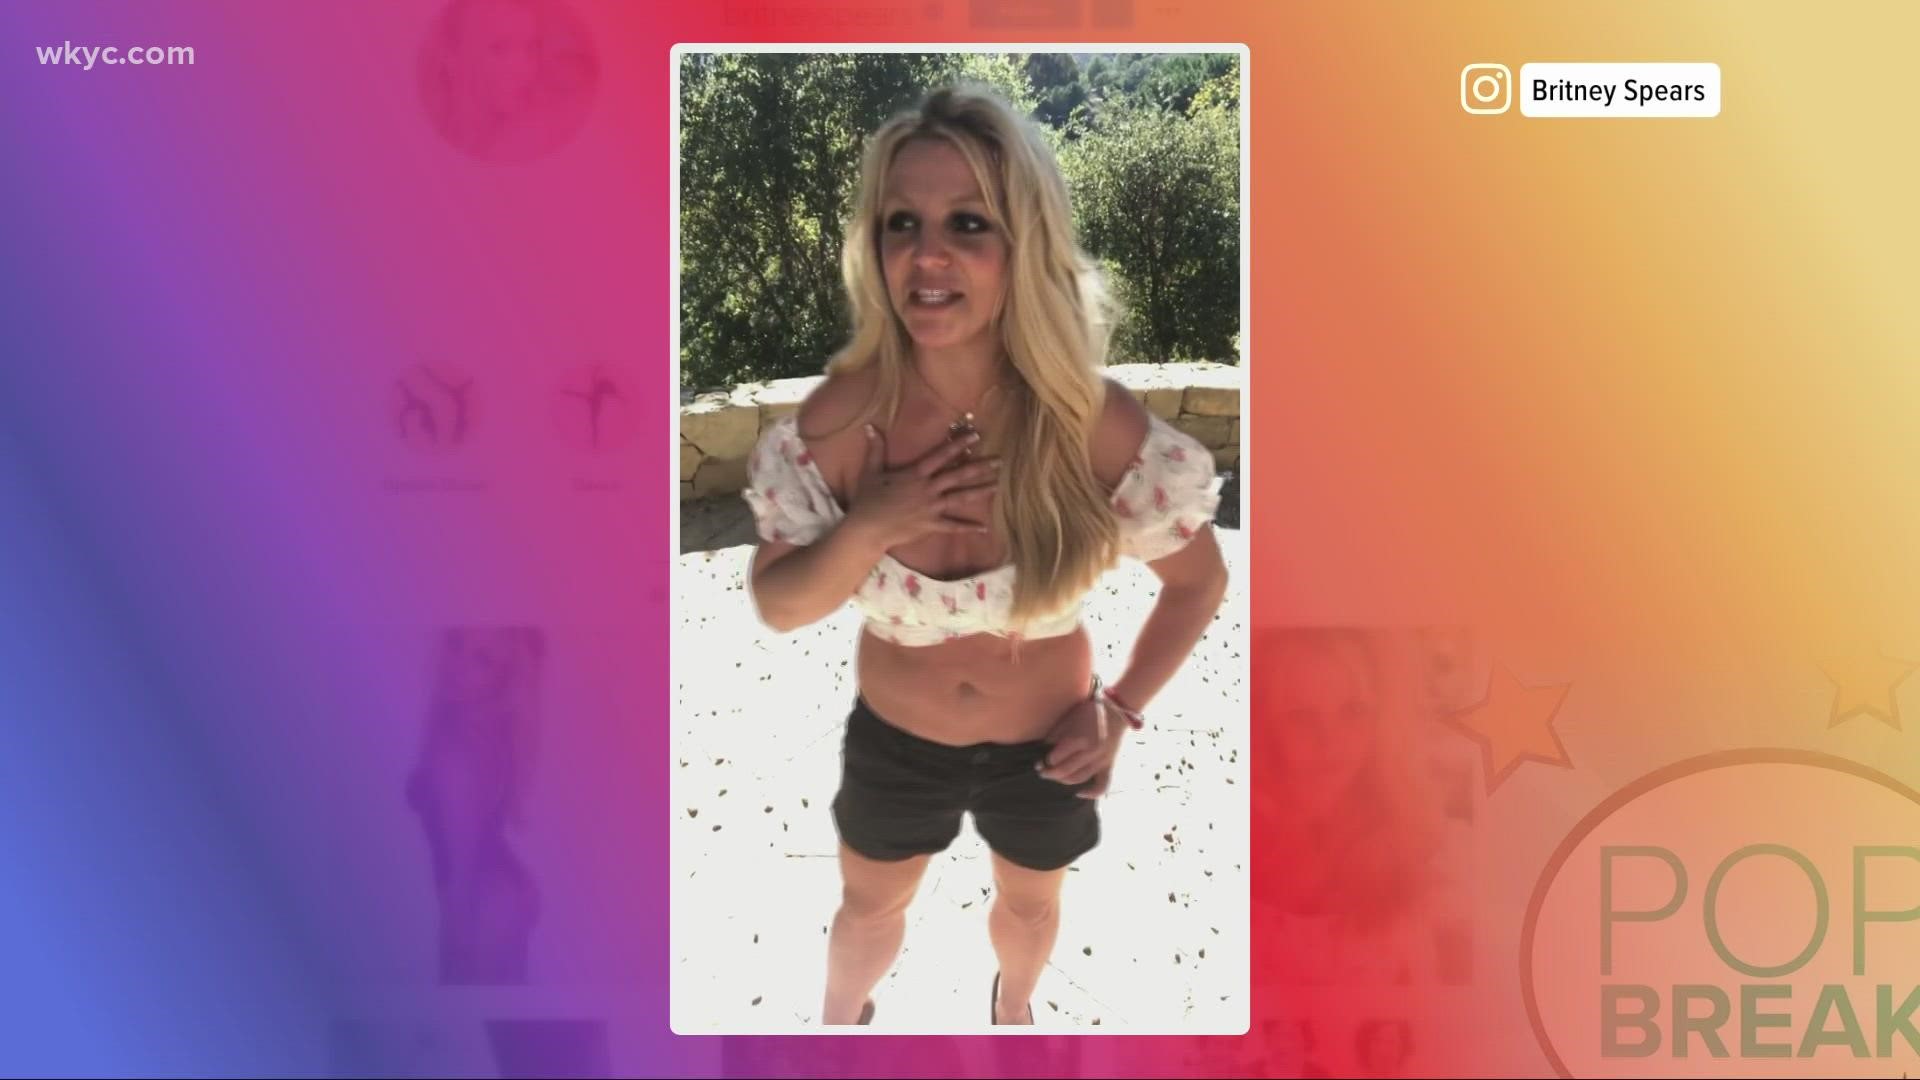 For the first time in 14 years, Britney Spears has control of her life back.